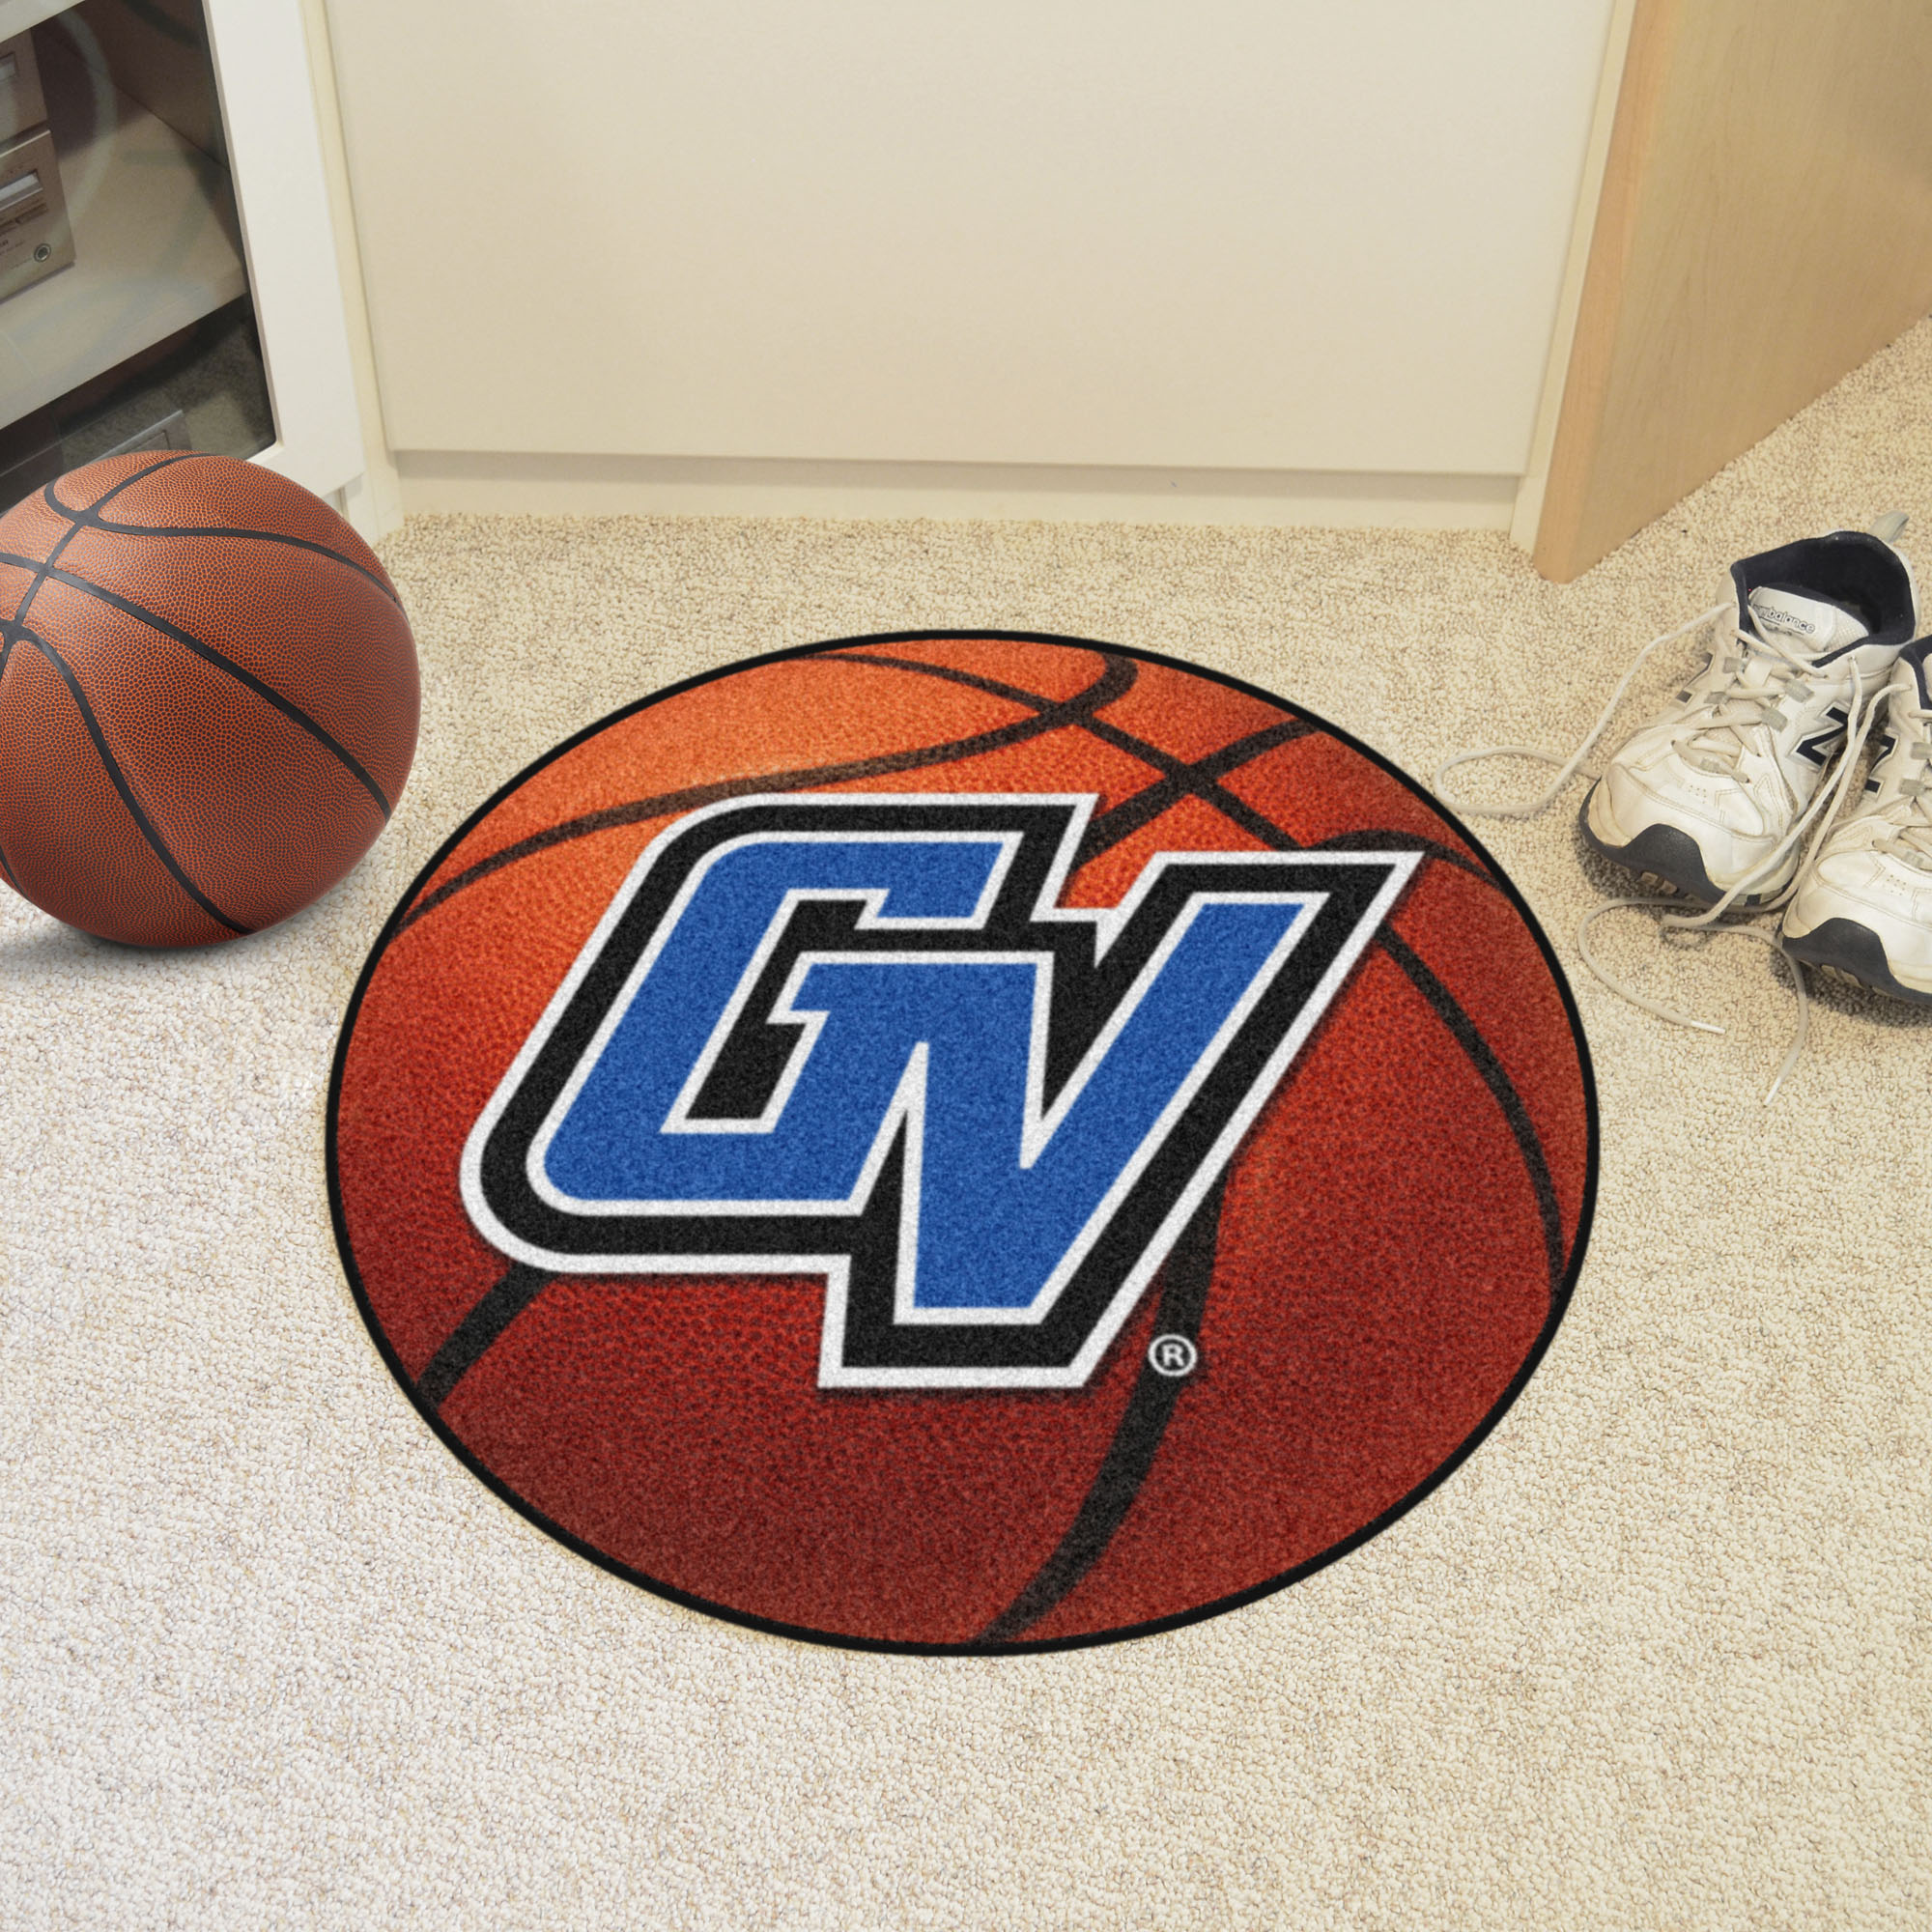 Grand Valley State University Ball Shaped Area Rugs (Ball Shaped Area Rugs: Basketball)